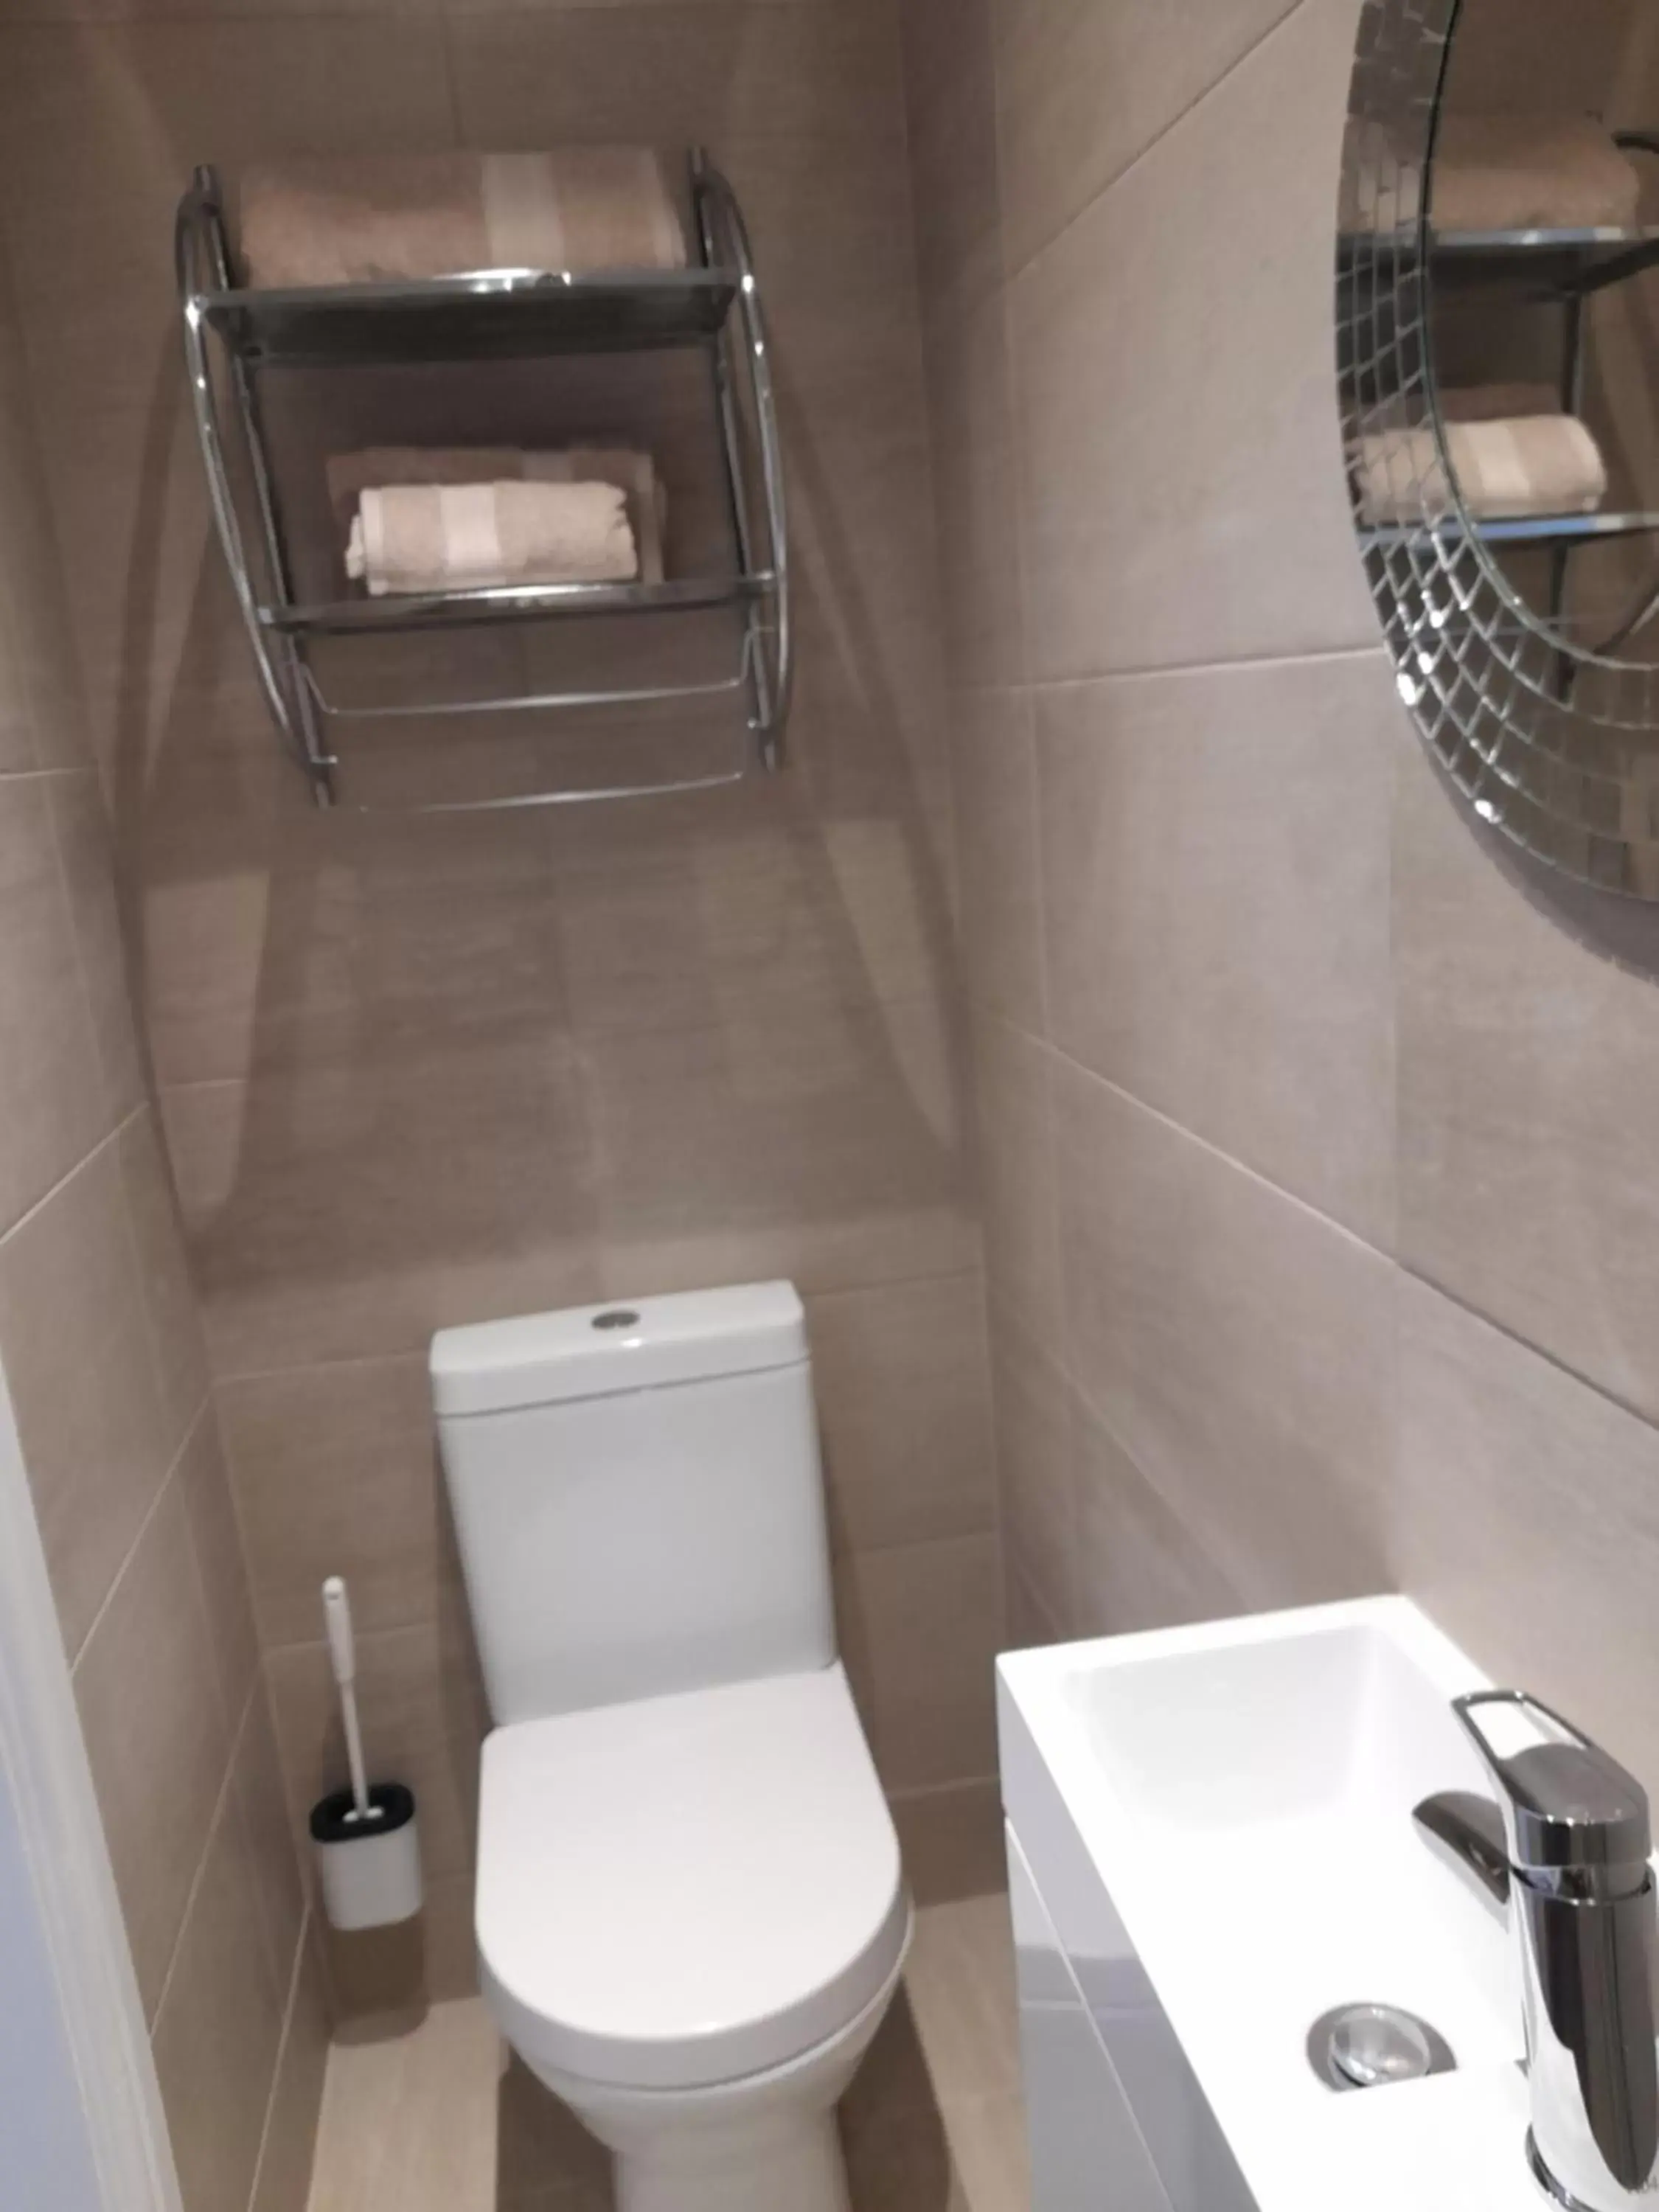 Bathroom in Lovely Home with full en-suite double bed rooms